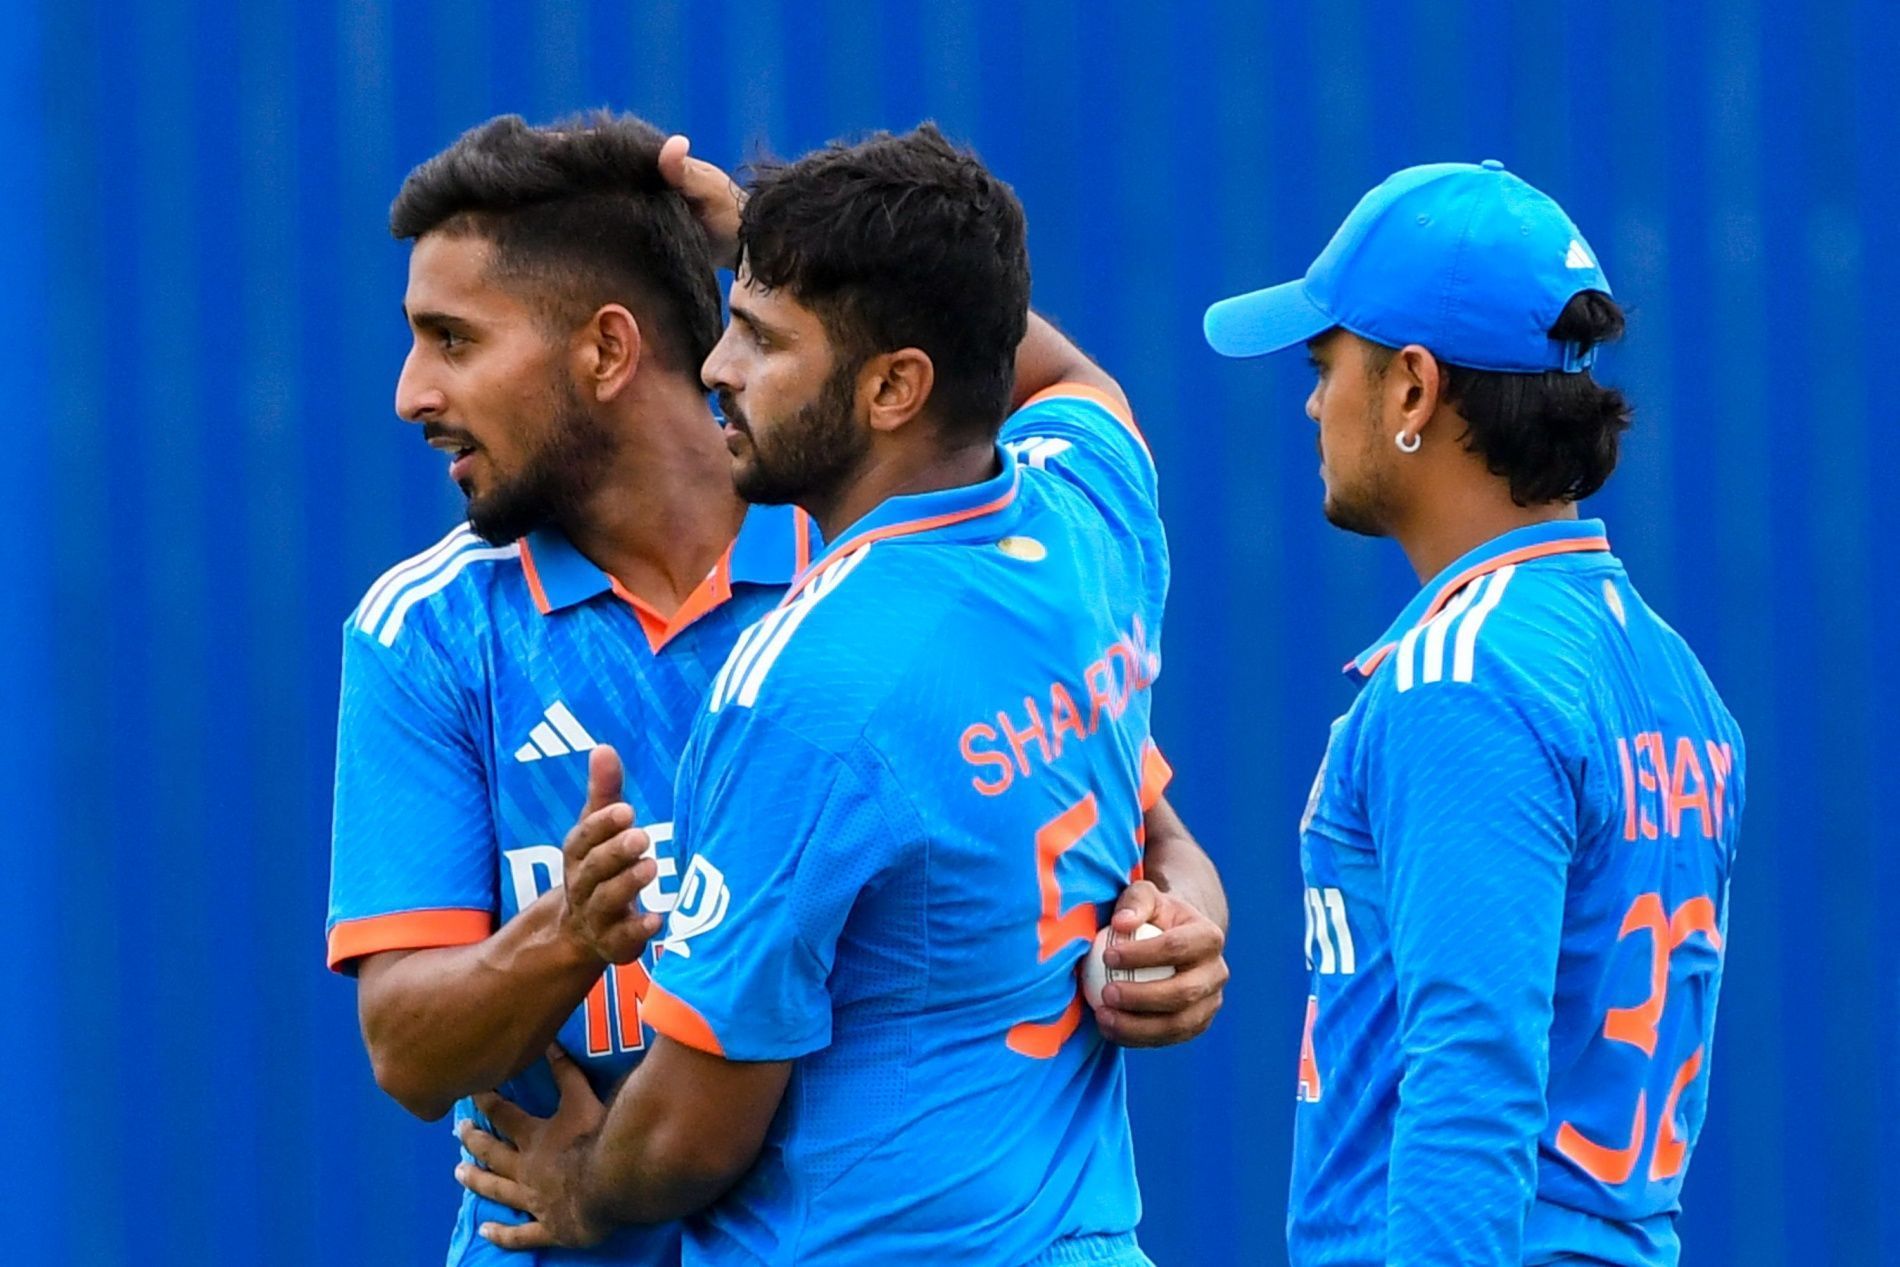 Shardul Thakur celebrates a wicket with his teammates. (Pic: BCCI)